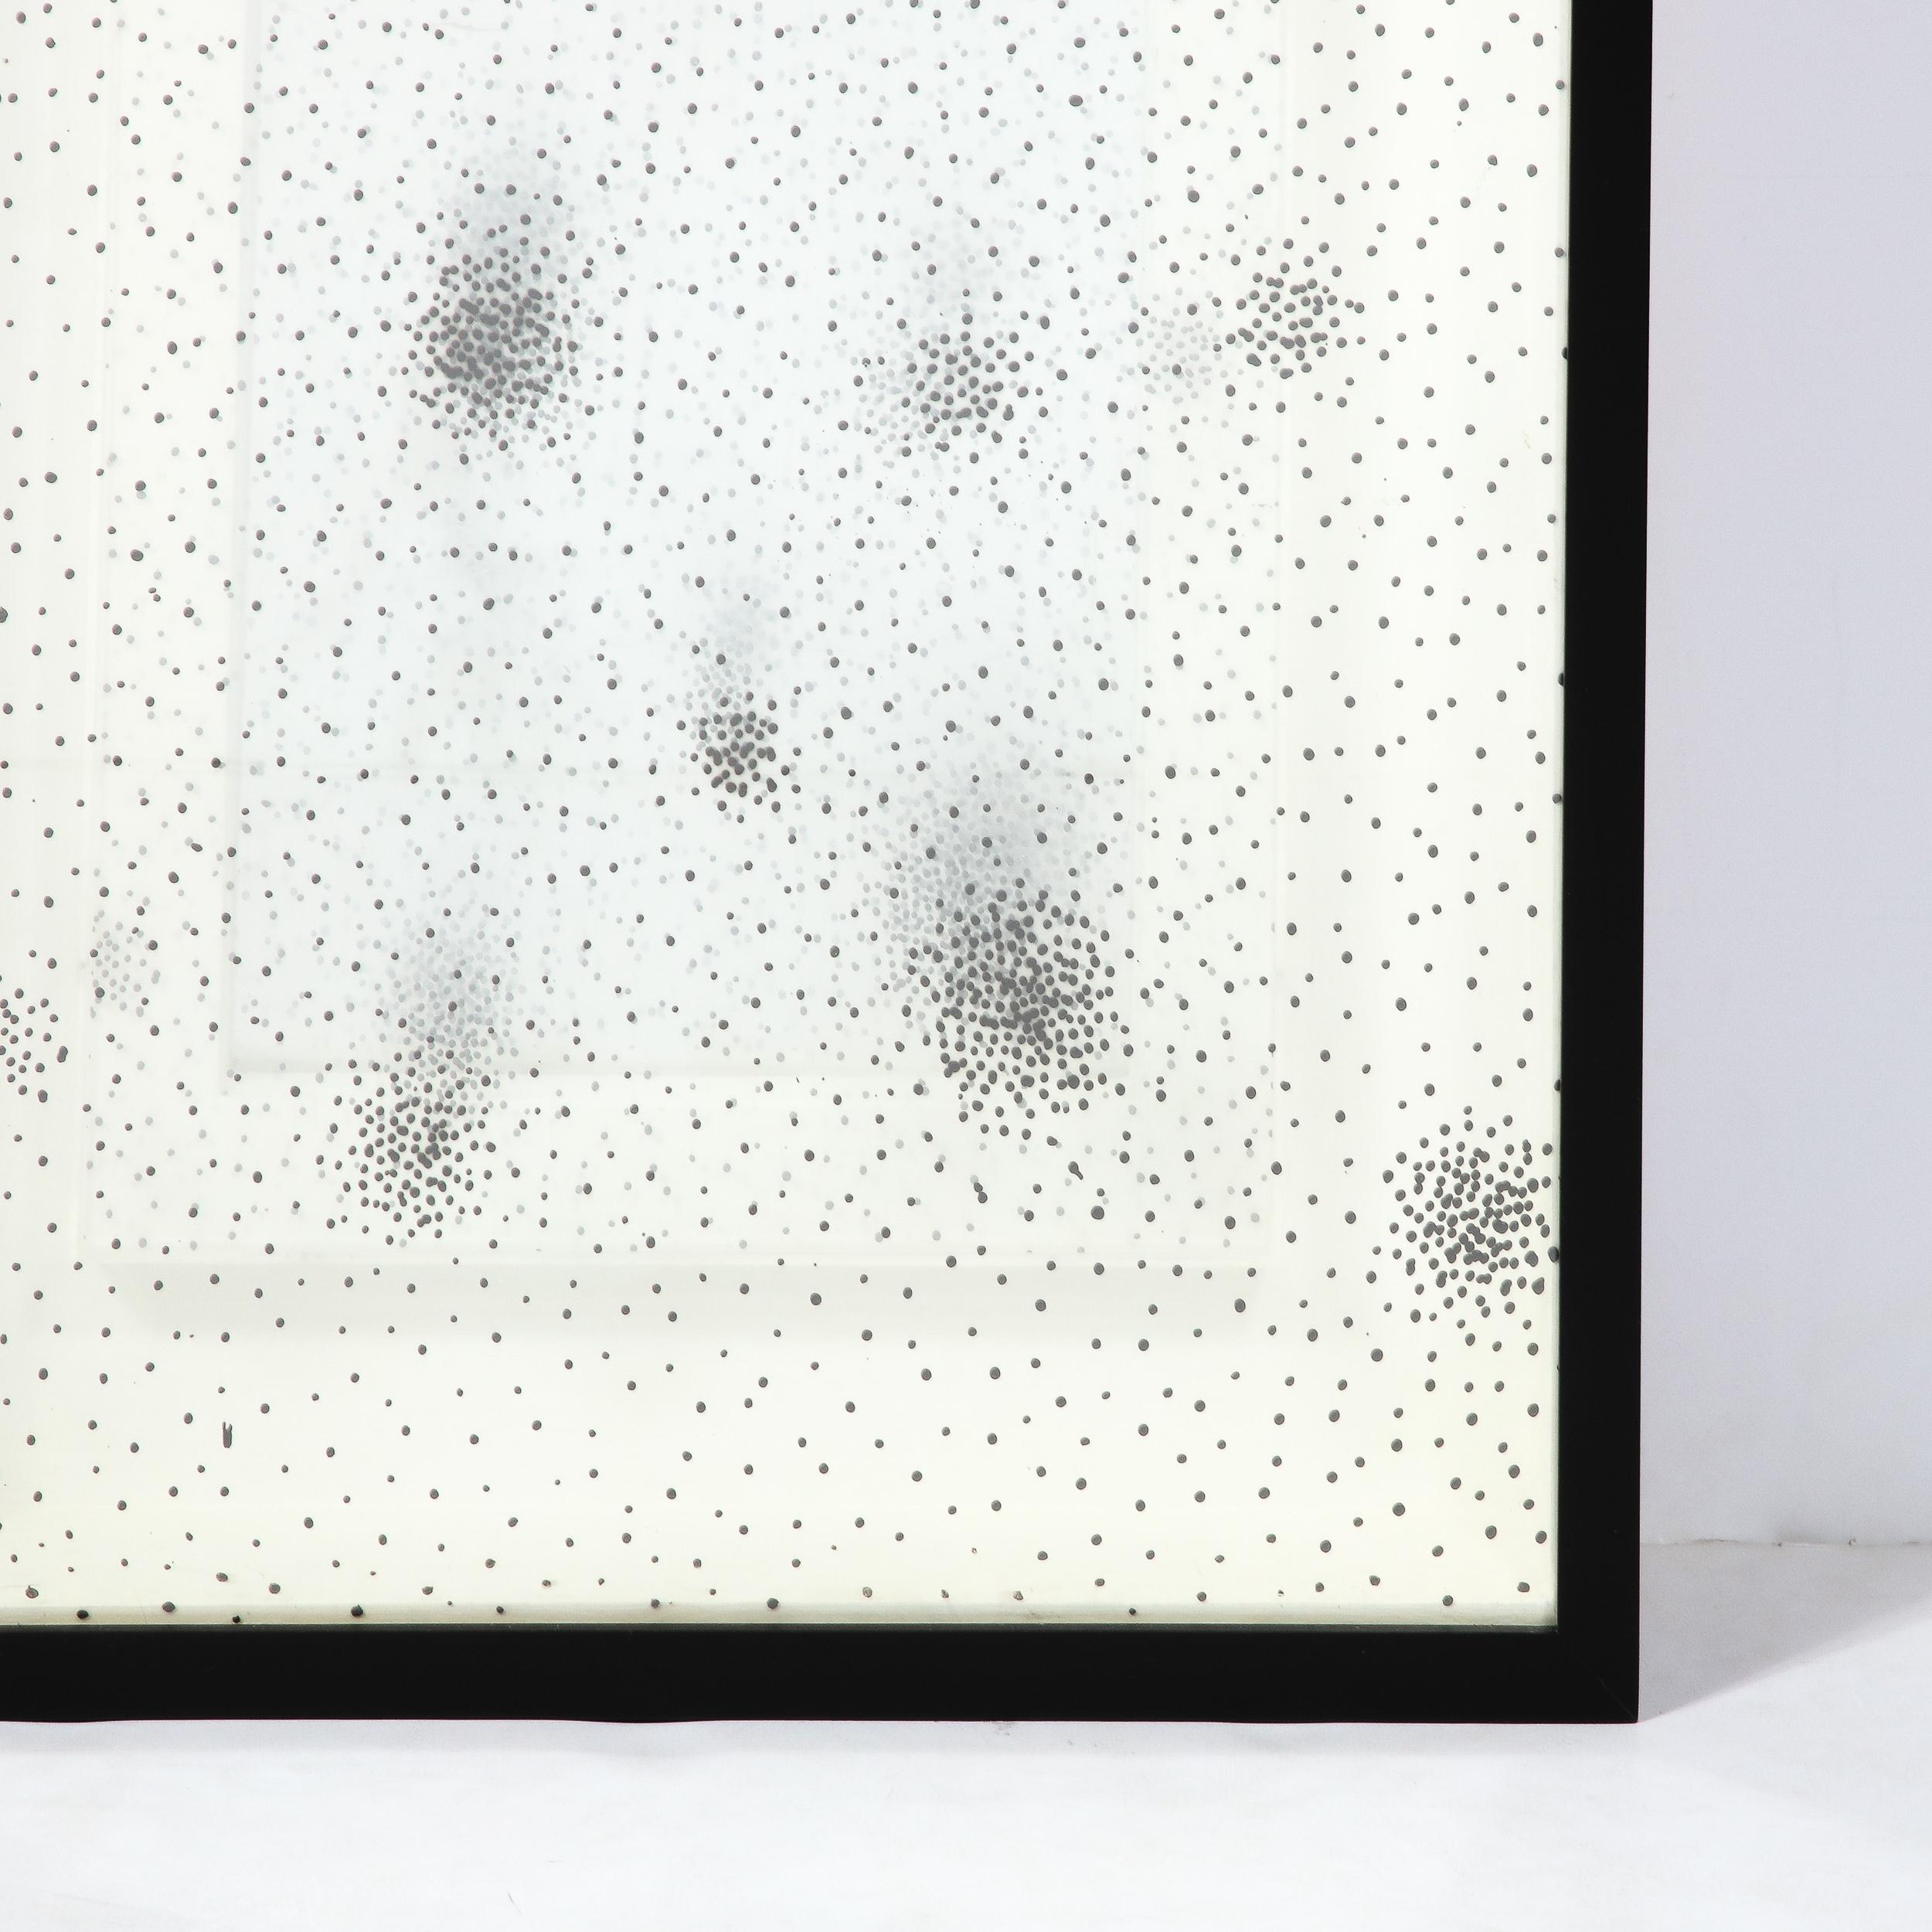 Mid Century Modern Dimensional Ink on Acetate Stippled Op Art Mixed Media Work For Sale 2